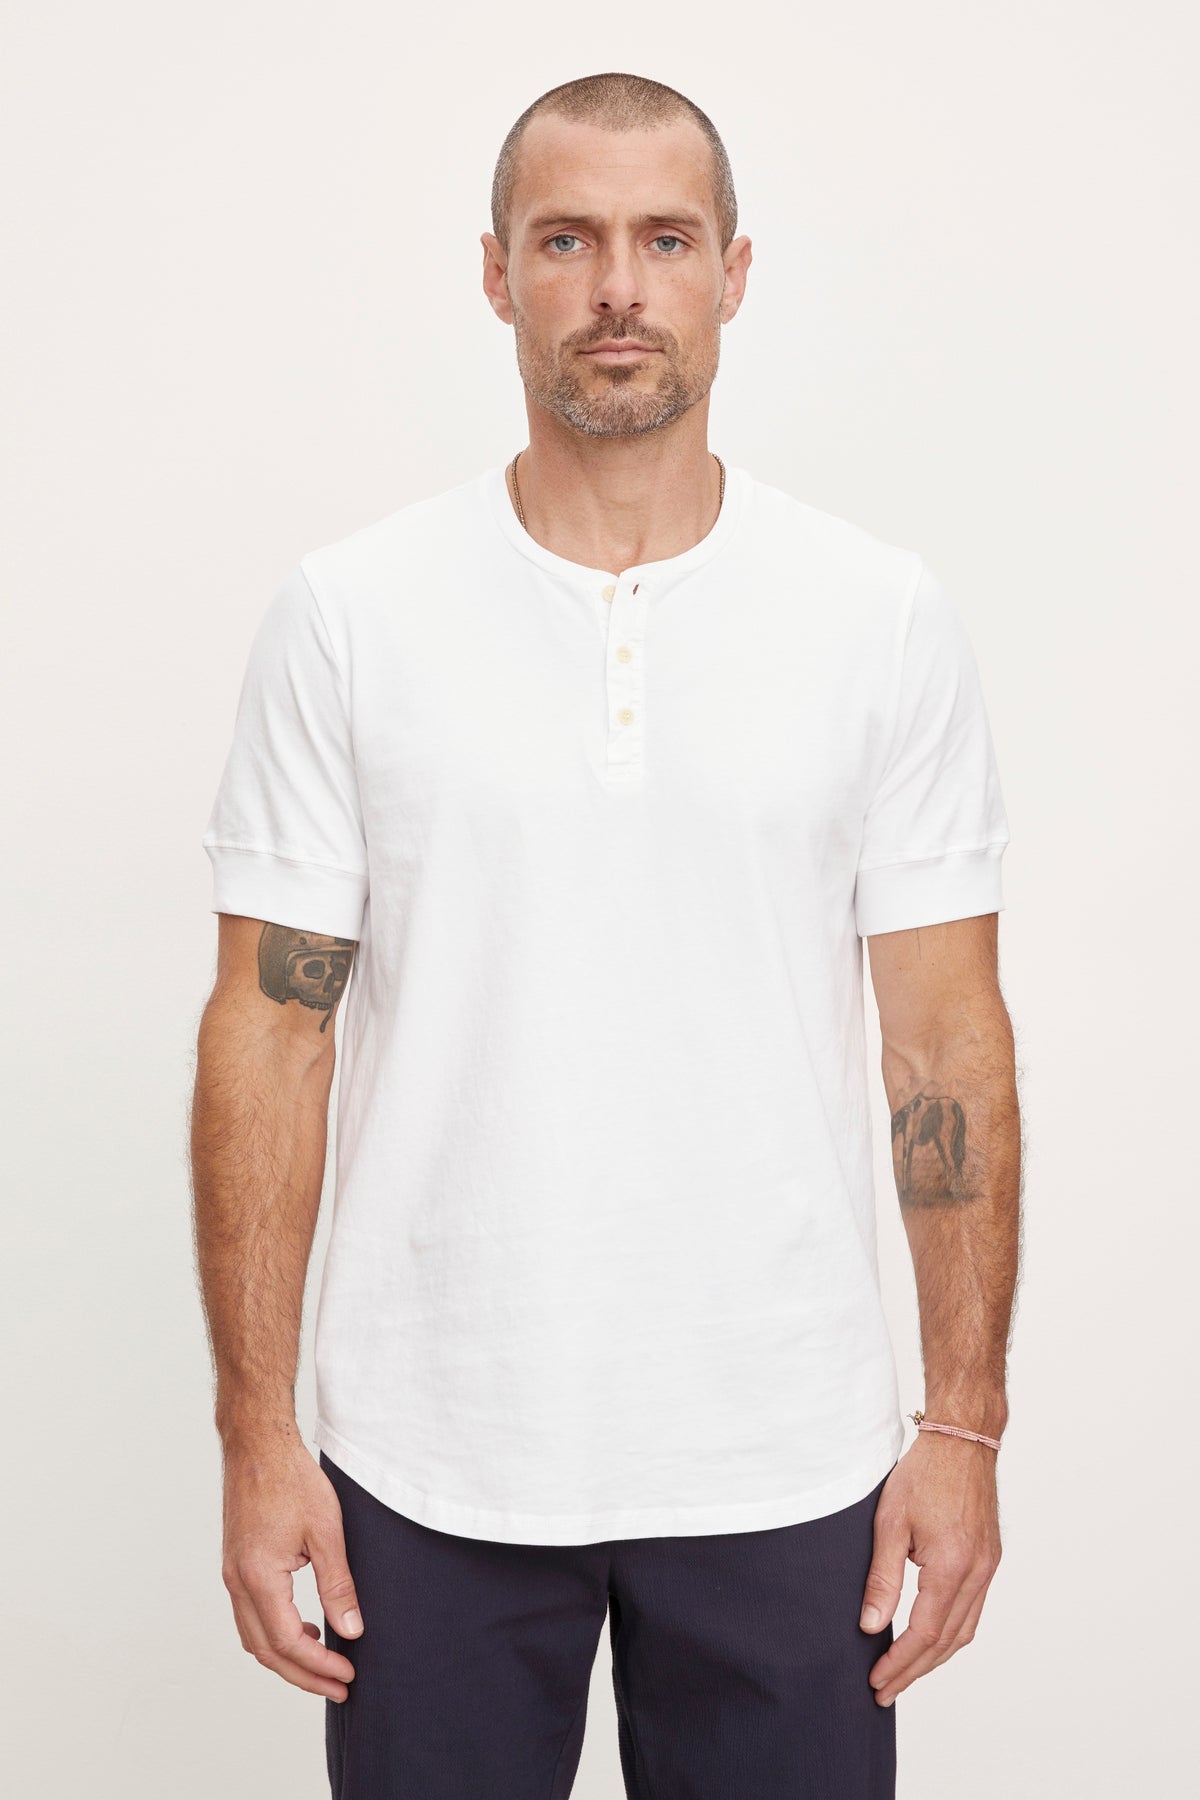   A man with a short haircut and tattoos on his arms stands against a plain background, wearing a white cotton knit DEON HENLEY by Velvet by Graham & Spencer with scooped hem details and dark pants. 